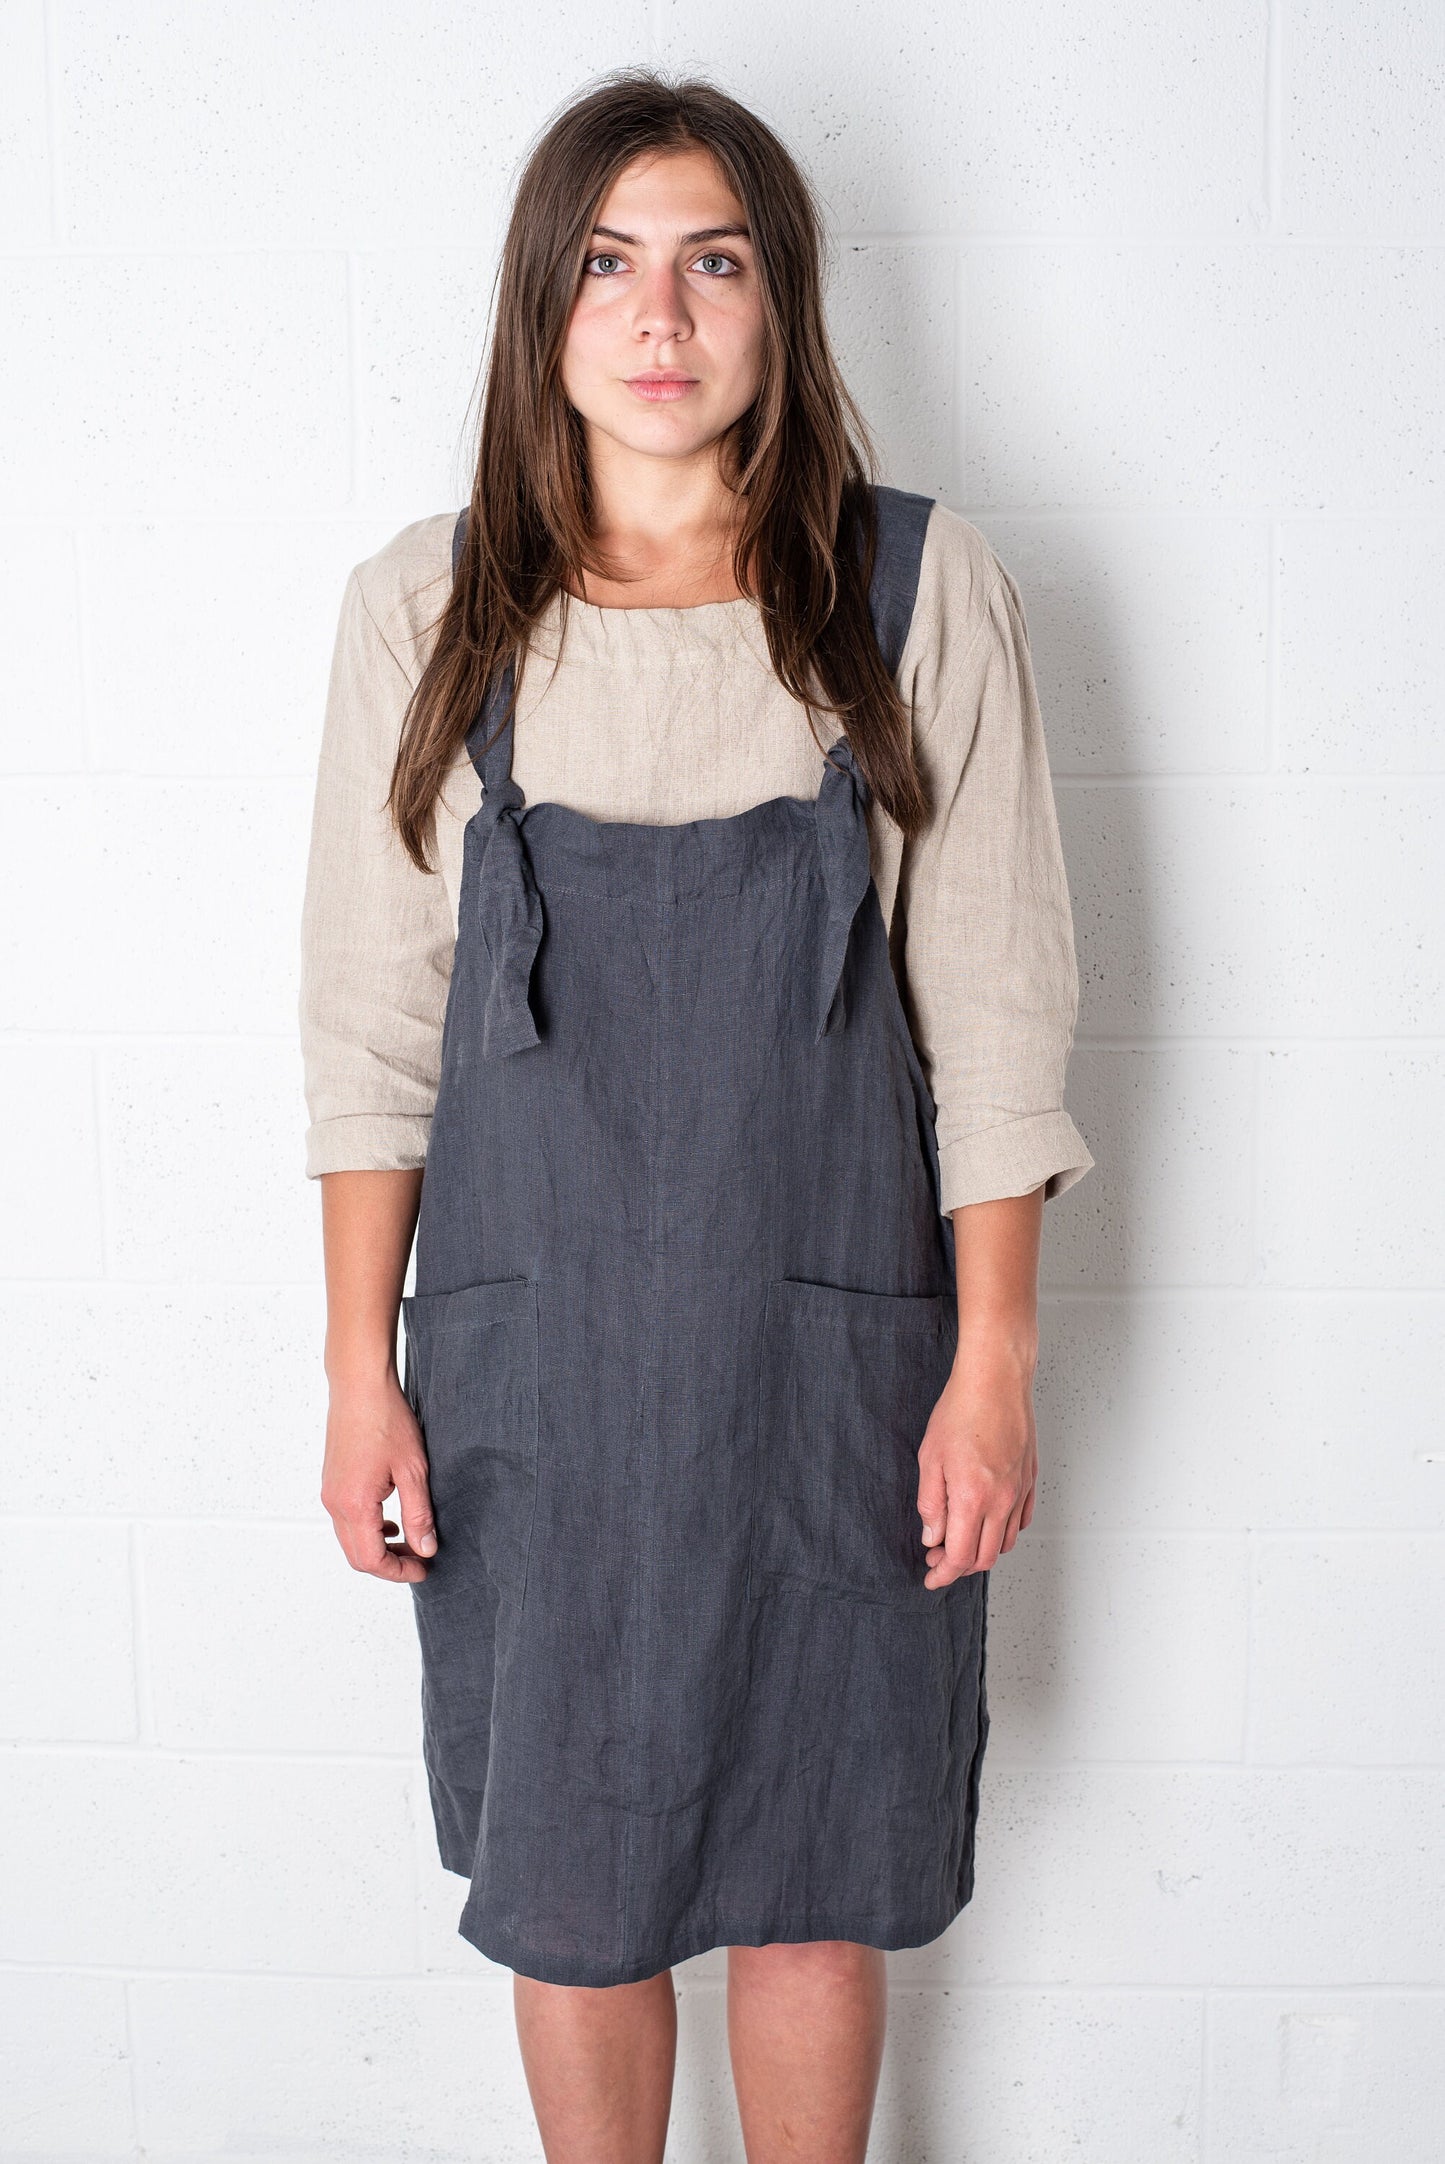 Linen Garden Dress: French Linen Apron Country Style